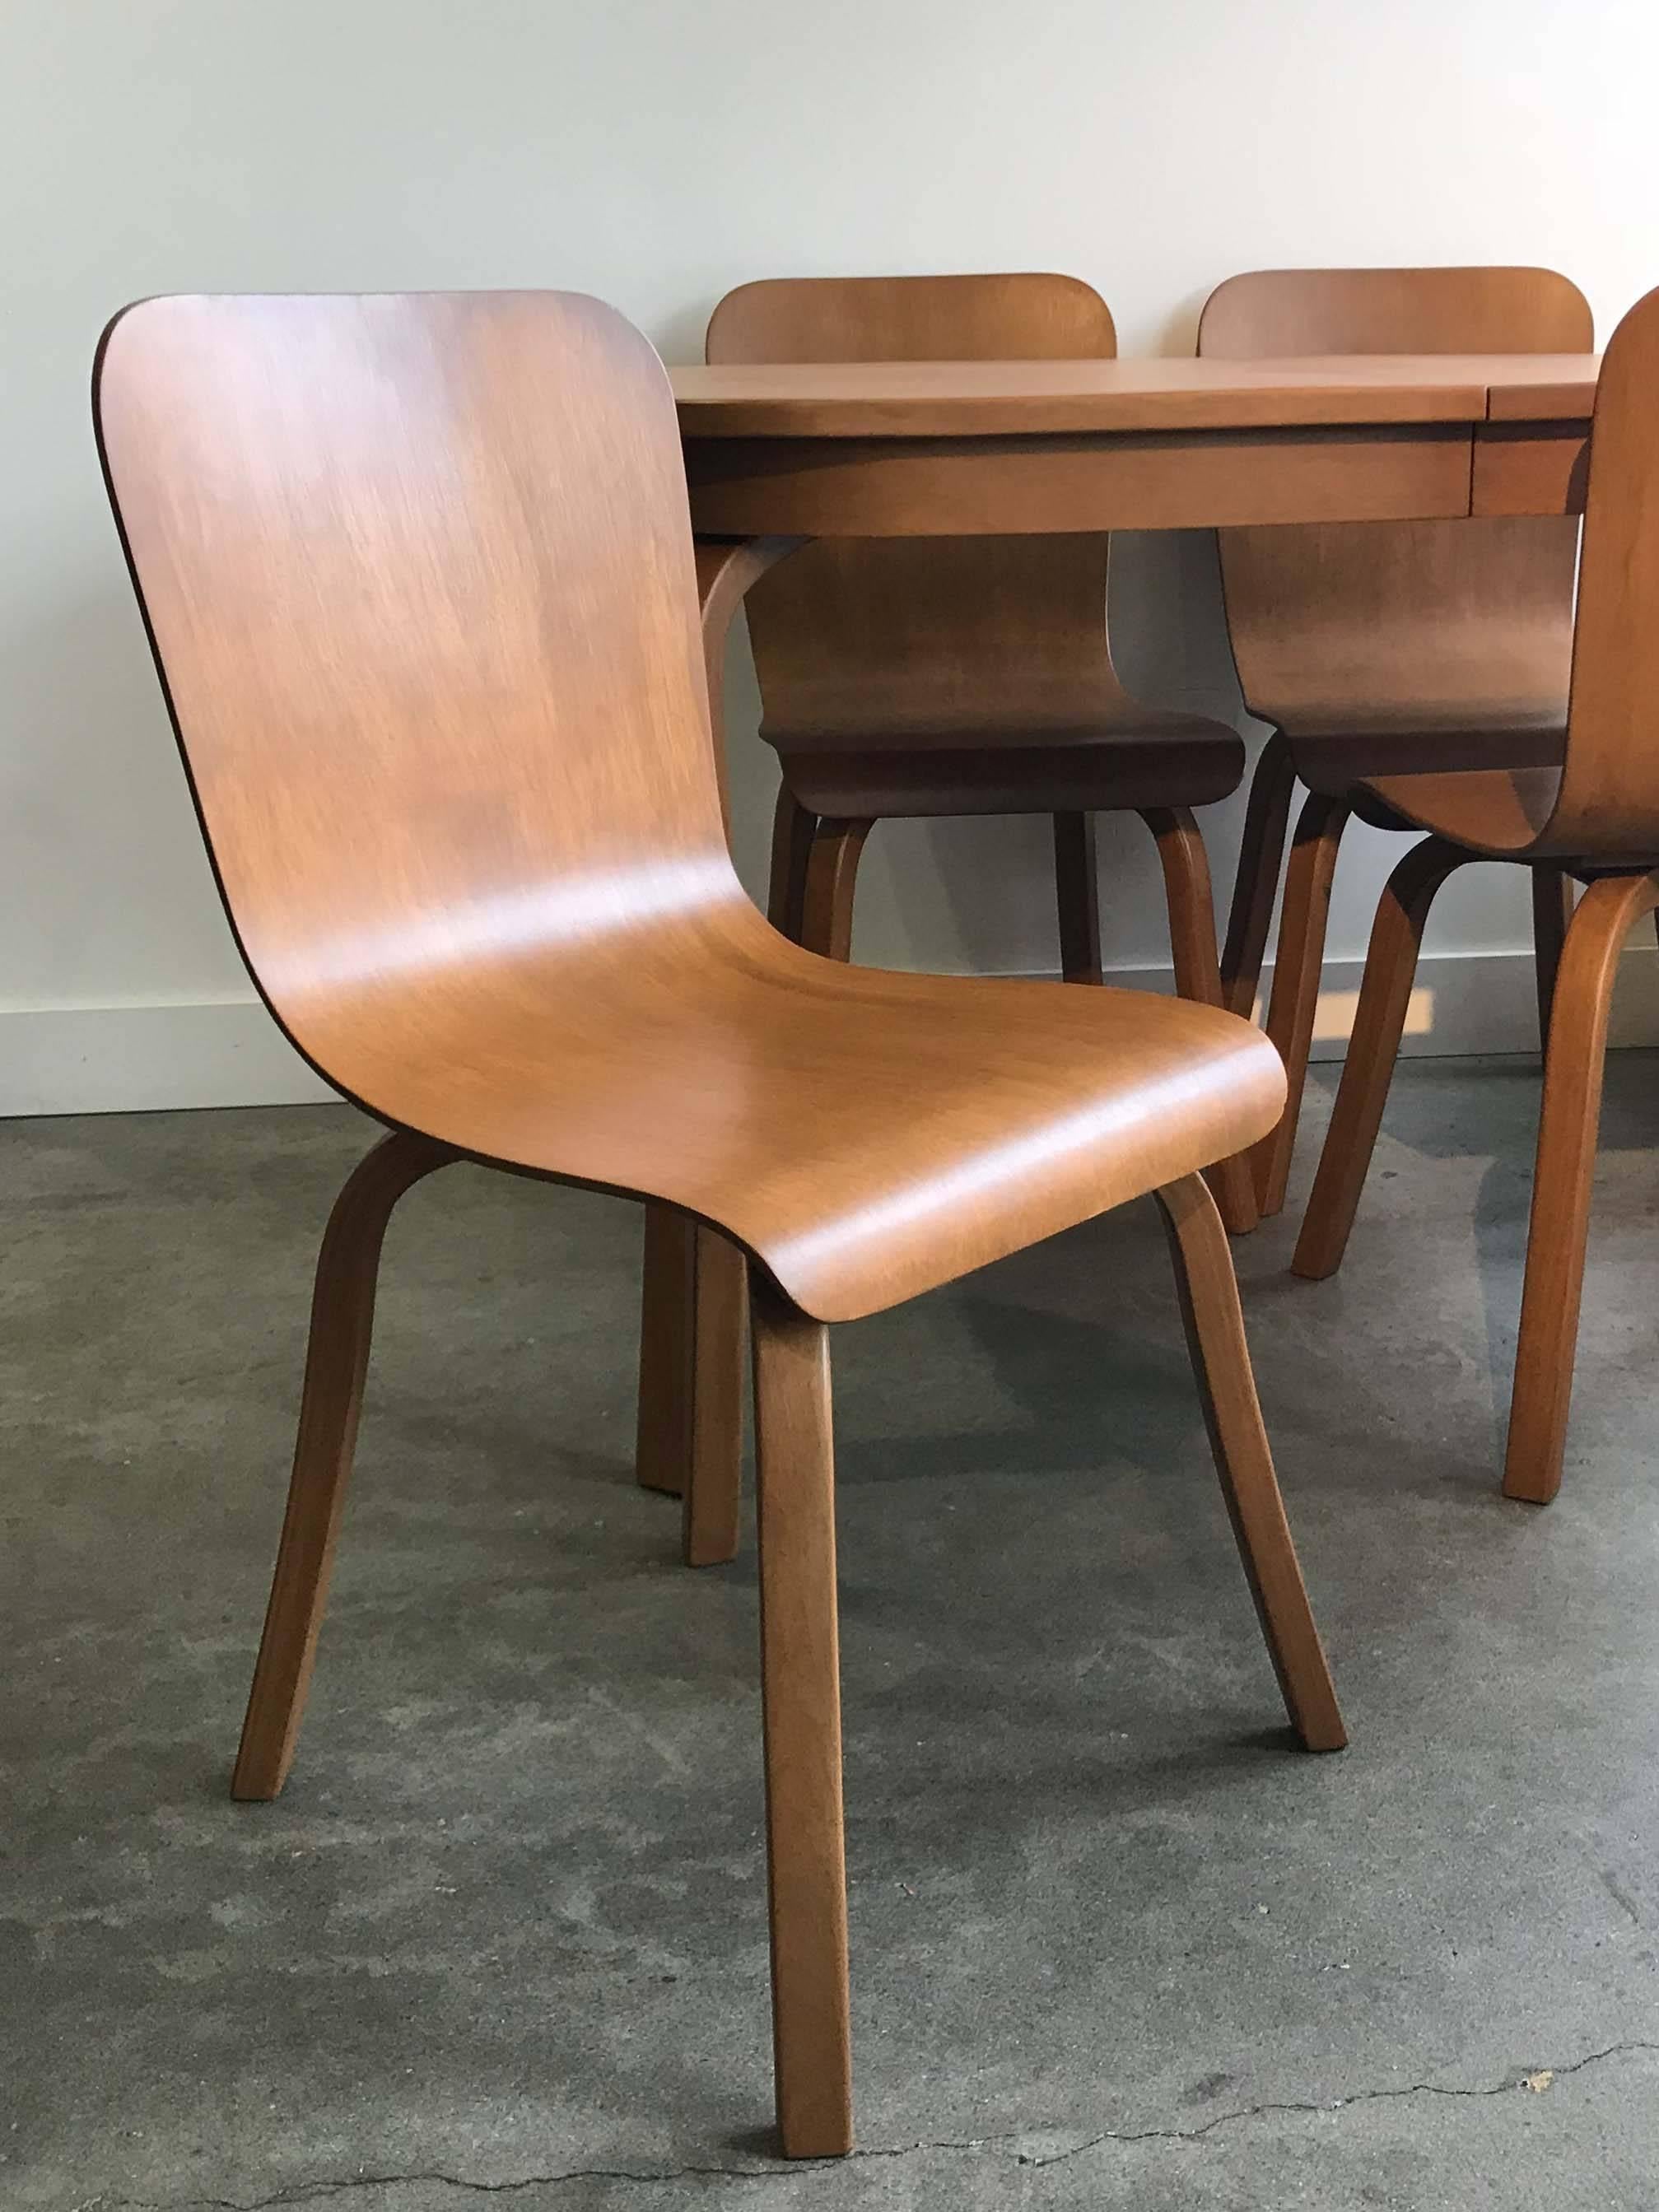 Bentwood dining table and set of four chairs by Waclaw Czerwinski and Hilary Sylolt for Canadian Wooden Aircraft in the mid-1940s. Reconditioned and restored, stamped on bottom. Excellent condition. 

Measures: Table: 48" W x 32" D x